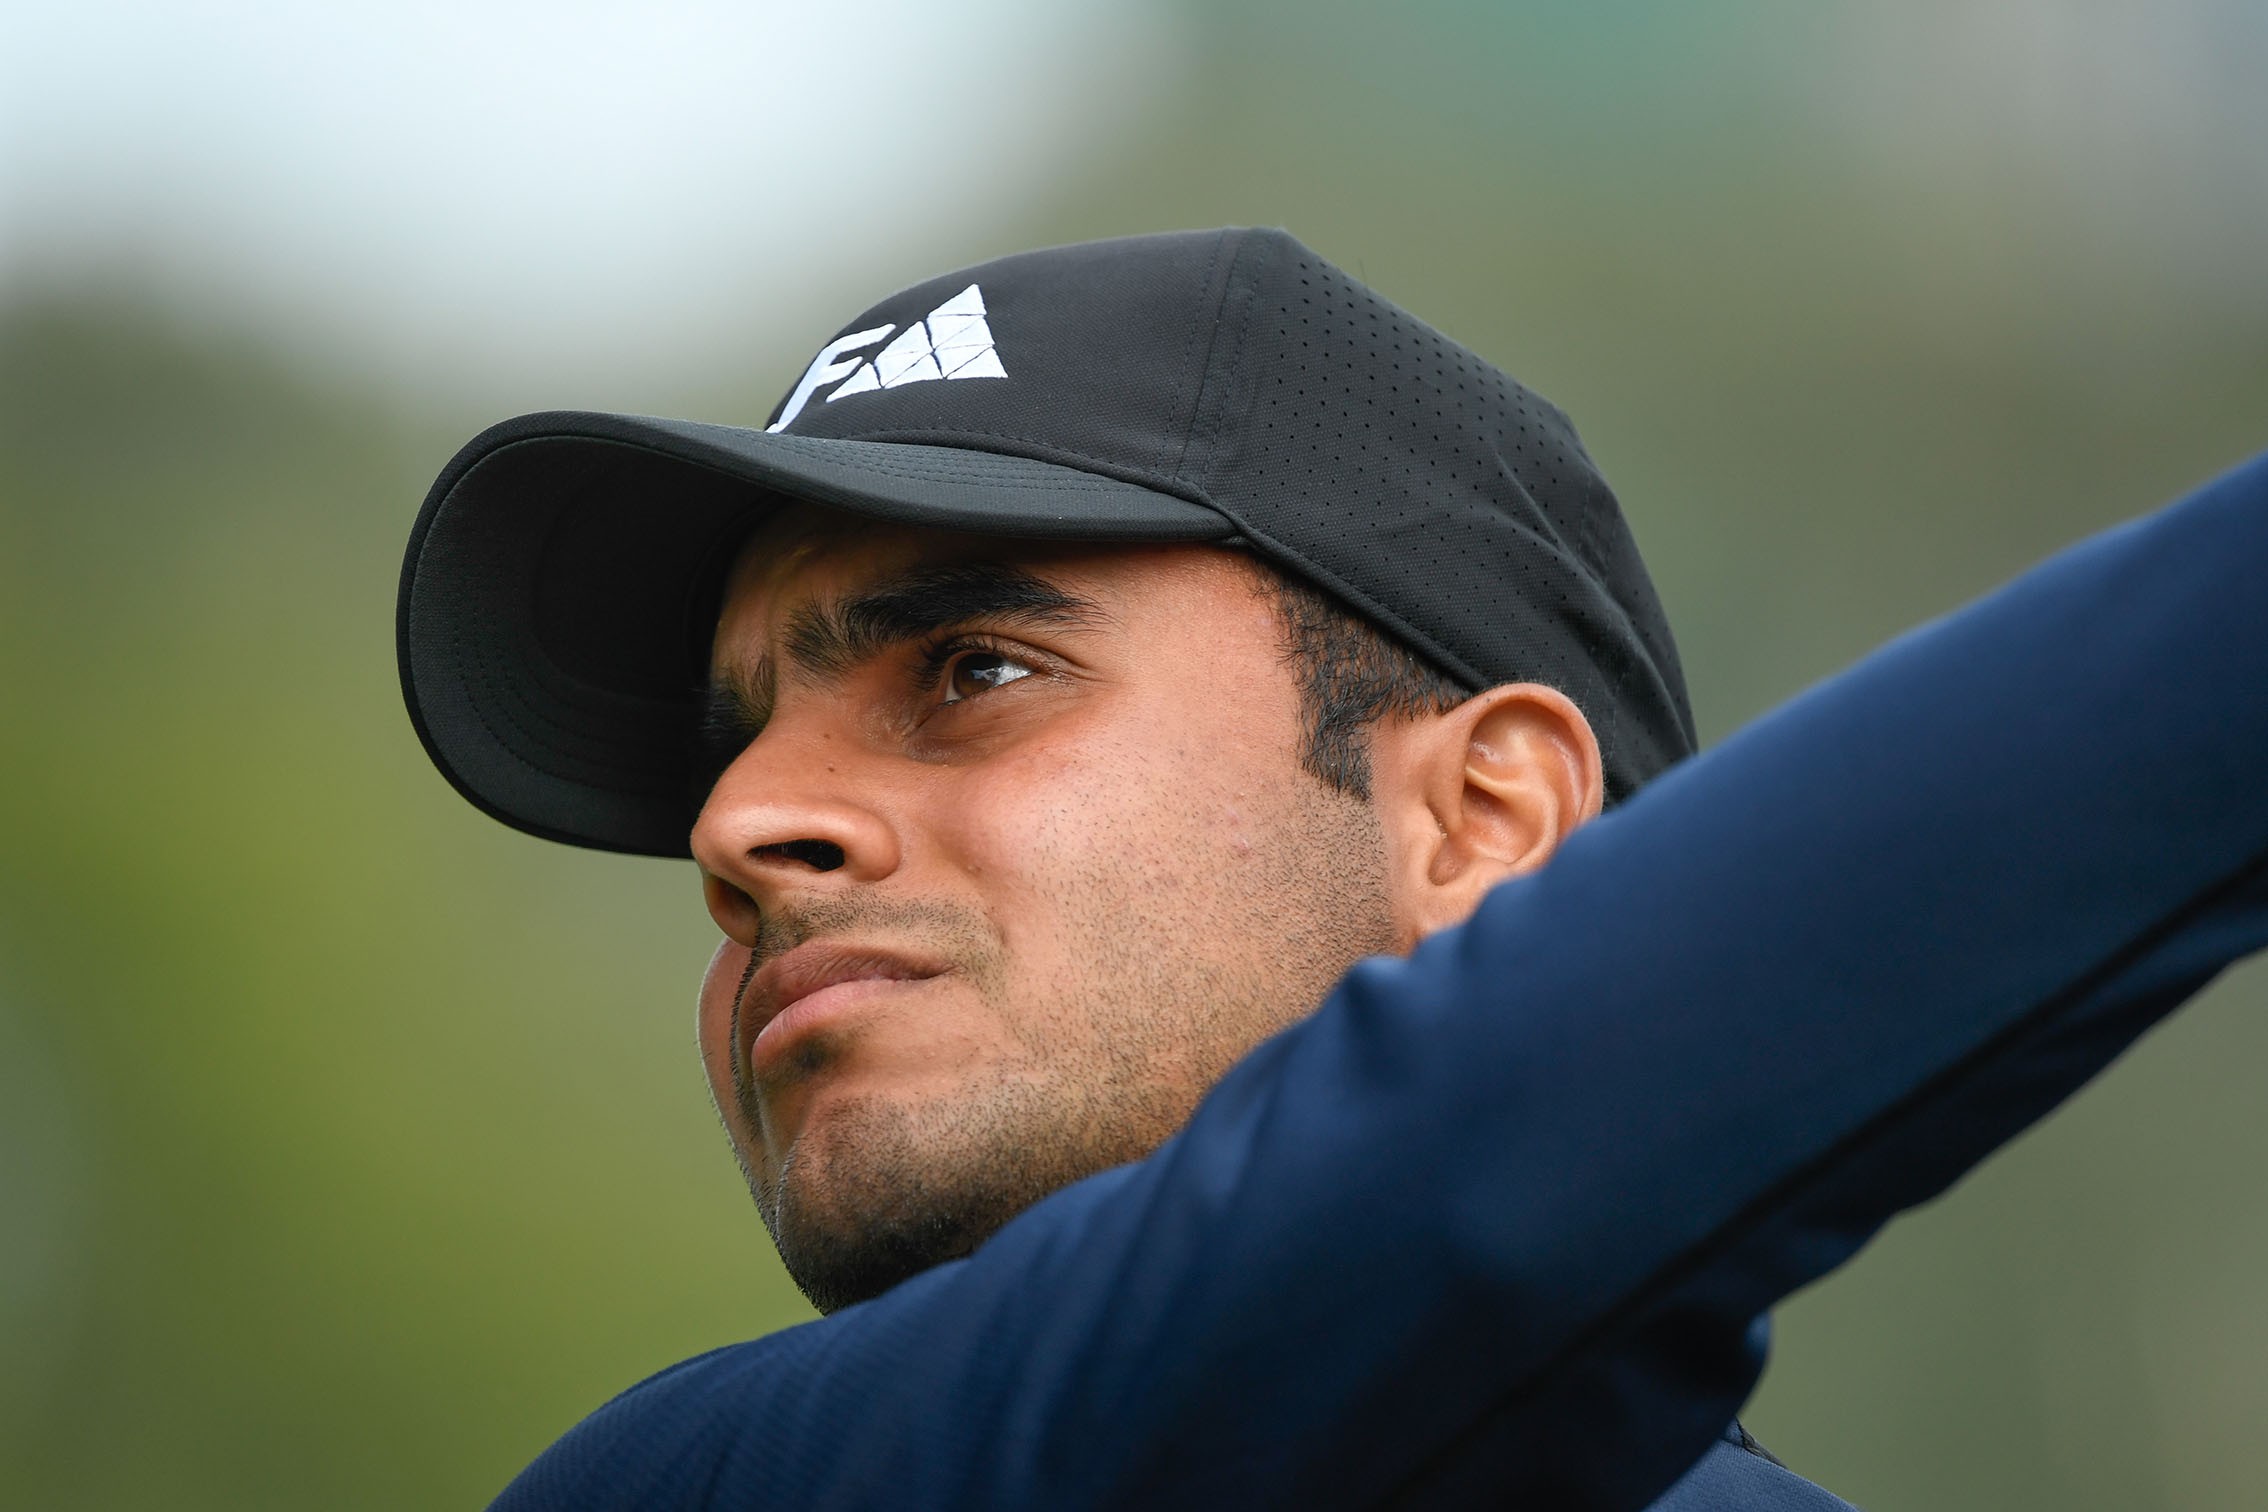 A focused Shubhankar Sharma during the first round of the Hong Kong Open. Photo: Richard Castka